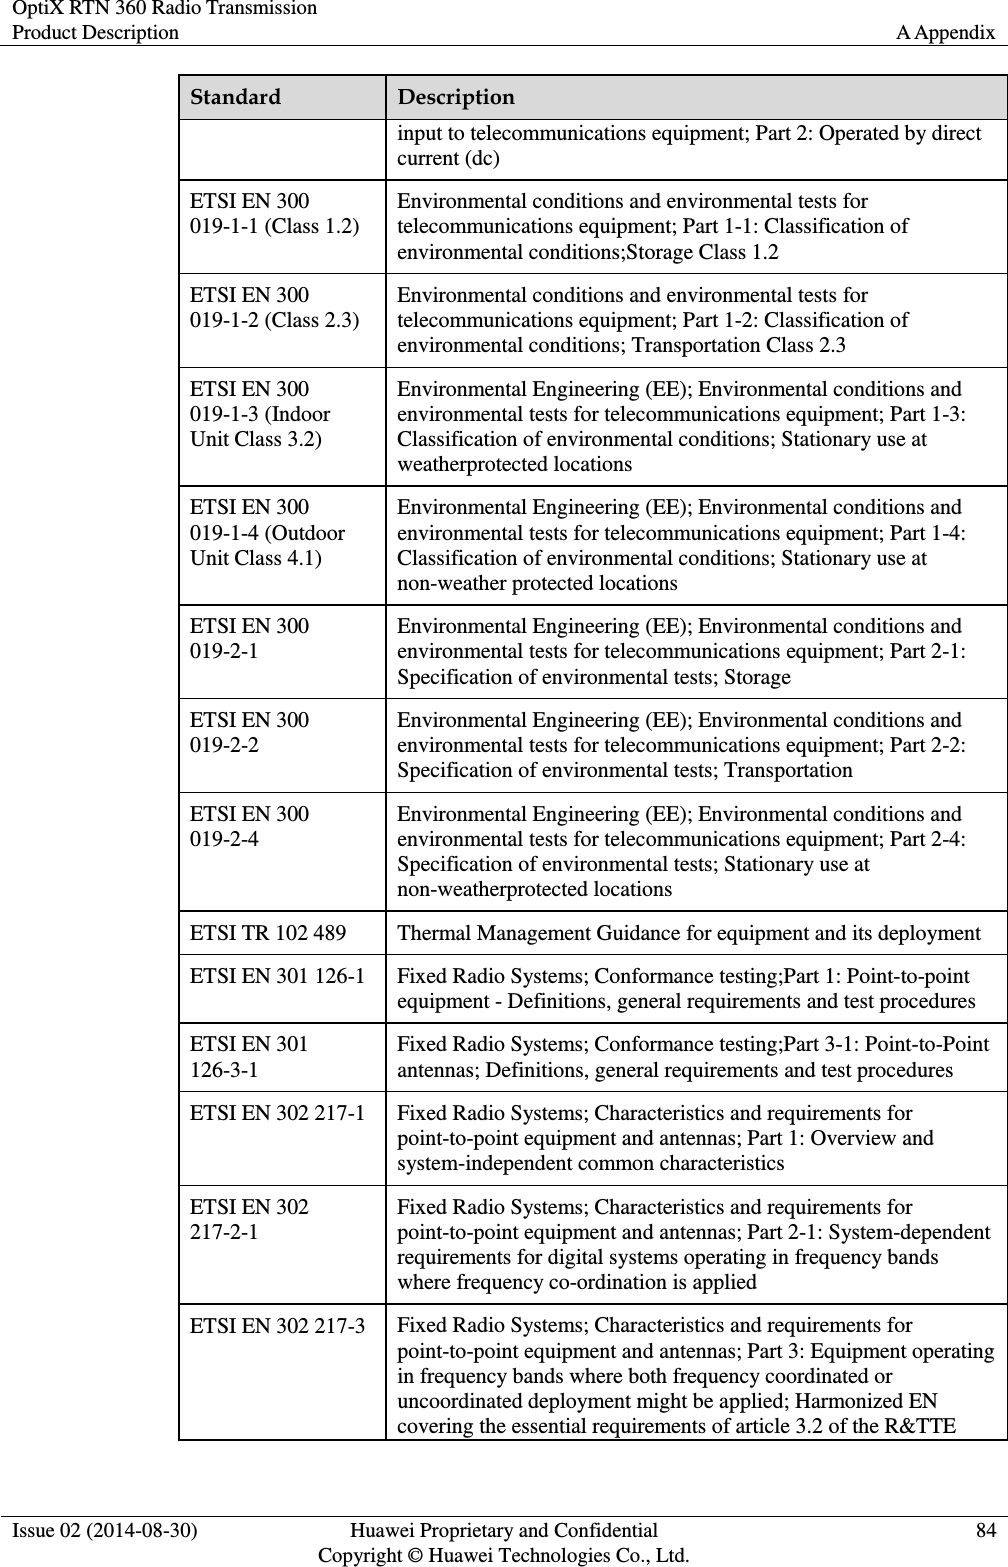 OptiX RTN 360 Radio Transmission Product Description A Appendix  Issue 02 (2014-08-30) Huawei Proprietary and Confidential                                     Copyright © Huawei Technologies Co., Ltd. 84  Standard Description input to telecommunications equipment; Part 2: Operated by direct current (dc) ETSI EN 300 019-1-1 (Class 1.2) Environmental conditions and environmental tests for telecommunications equipment; Part 1-1: Classification of environmental conditions;Storage Class 1.2 ETSI EN 300 019-1-2 (Class 2.3) Environmental conditions and environmental tests for telecommunications equipment; Part 1-2: Classification of environmental conditions; Transportation Class 2.3 ETSI EN 300 019-1-3 (Indoor Unit Class 3.2) Environmental Engineering (EE); Environmental conditions and environmental tests for telecommunications equipment; Part 1-3: Classification of environmental conditions; Stationary use at weatherprotected locations ETSI EN 300 019-1-4 (Outdoor Unit Class 4.1) Environmental Engineering (EE); Environmental conditions and environmental tests for telecommunications equipment; Part 1-4: Classification of environmental conditions; Stationary use at non-weather protected locations ETSI EN 300 019-2-1 Environmental Engineering (EE); Environmental conditions and environmental tests for telecommunications equipment; Part 2-1: Specification of environmental tests; Storage ETSI EN 300 019-2-2 Environmental Engineering (EE); Environmental conditions and environmental tests for telecommunications equipment; Part 2-2: Specification of environmental tests; Transportation ETSI EN 300 019-2-4 Environmental Engineering (EE); Environmental conditions and environmental tests for telecommunications equipment; Part 2-4: Specification of environmental tests; Stationary use at non-weatherprotected locations ETSI TR 102 489 Thermal Management Guidance for equipment and its deployment ETSI EN 301 126-1 Fixed Radio Systems; Conformance testing;Part 1: Point-to-point equipment - Definitions, general requirements and test procedures   ETSI EN 301 126-3-1 Fixed Radio Systems; Conformance testing;Part 3-1: Point-to-Point antennas; Definitions, general requirements and test procedures   ETSI EN 302 217-1 Fixed Radio Systems; Characteristics and requirements for point-to-point equipment and antennas; Part 1: Overview and system-independent common characteristics ETSI EN 302 217-2-1 Fixed Radio Systems; Characteristics and requirements for point-to-point equipment and antennas; Part 2-1: System-dependent requirements for digital systems operating in frequency bands where frequency co-ordination is applied ETSI EN 302 217-3 Fixed Radio Systems; Characteristics and requirements for point-to-point equipment and antennas; Part 3: Equipment operating in frequency bands where both frequency coordinated or uncoordinated deployment might be applied; Harmonized EN covering the essential requirements of article 3.2 of the R&amp;TTE 